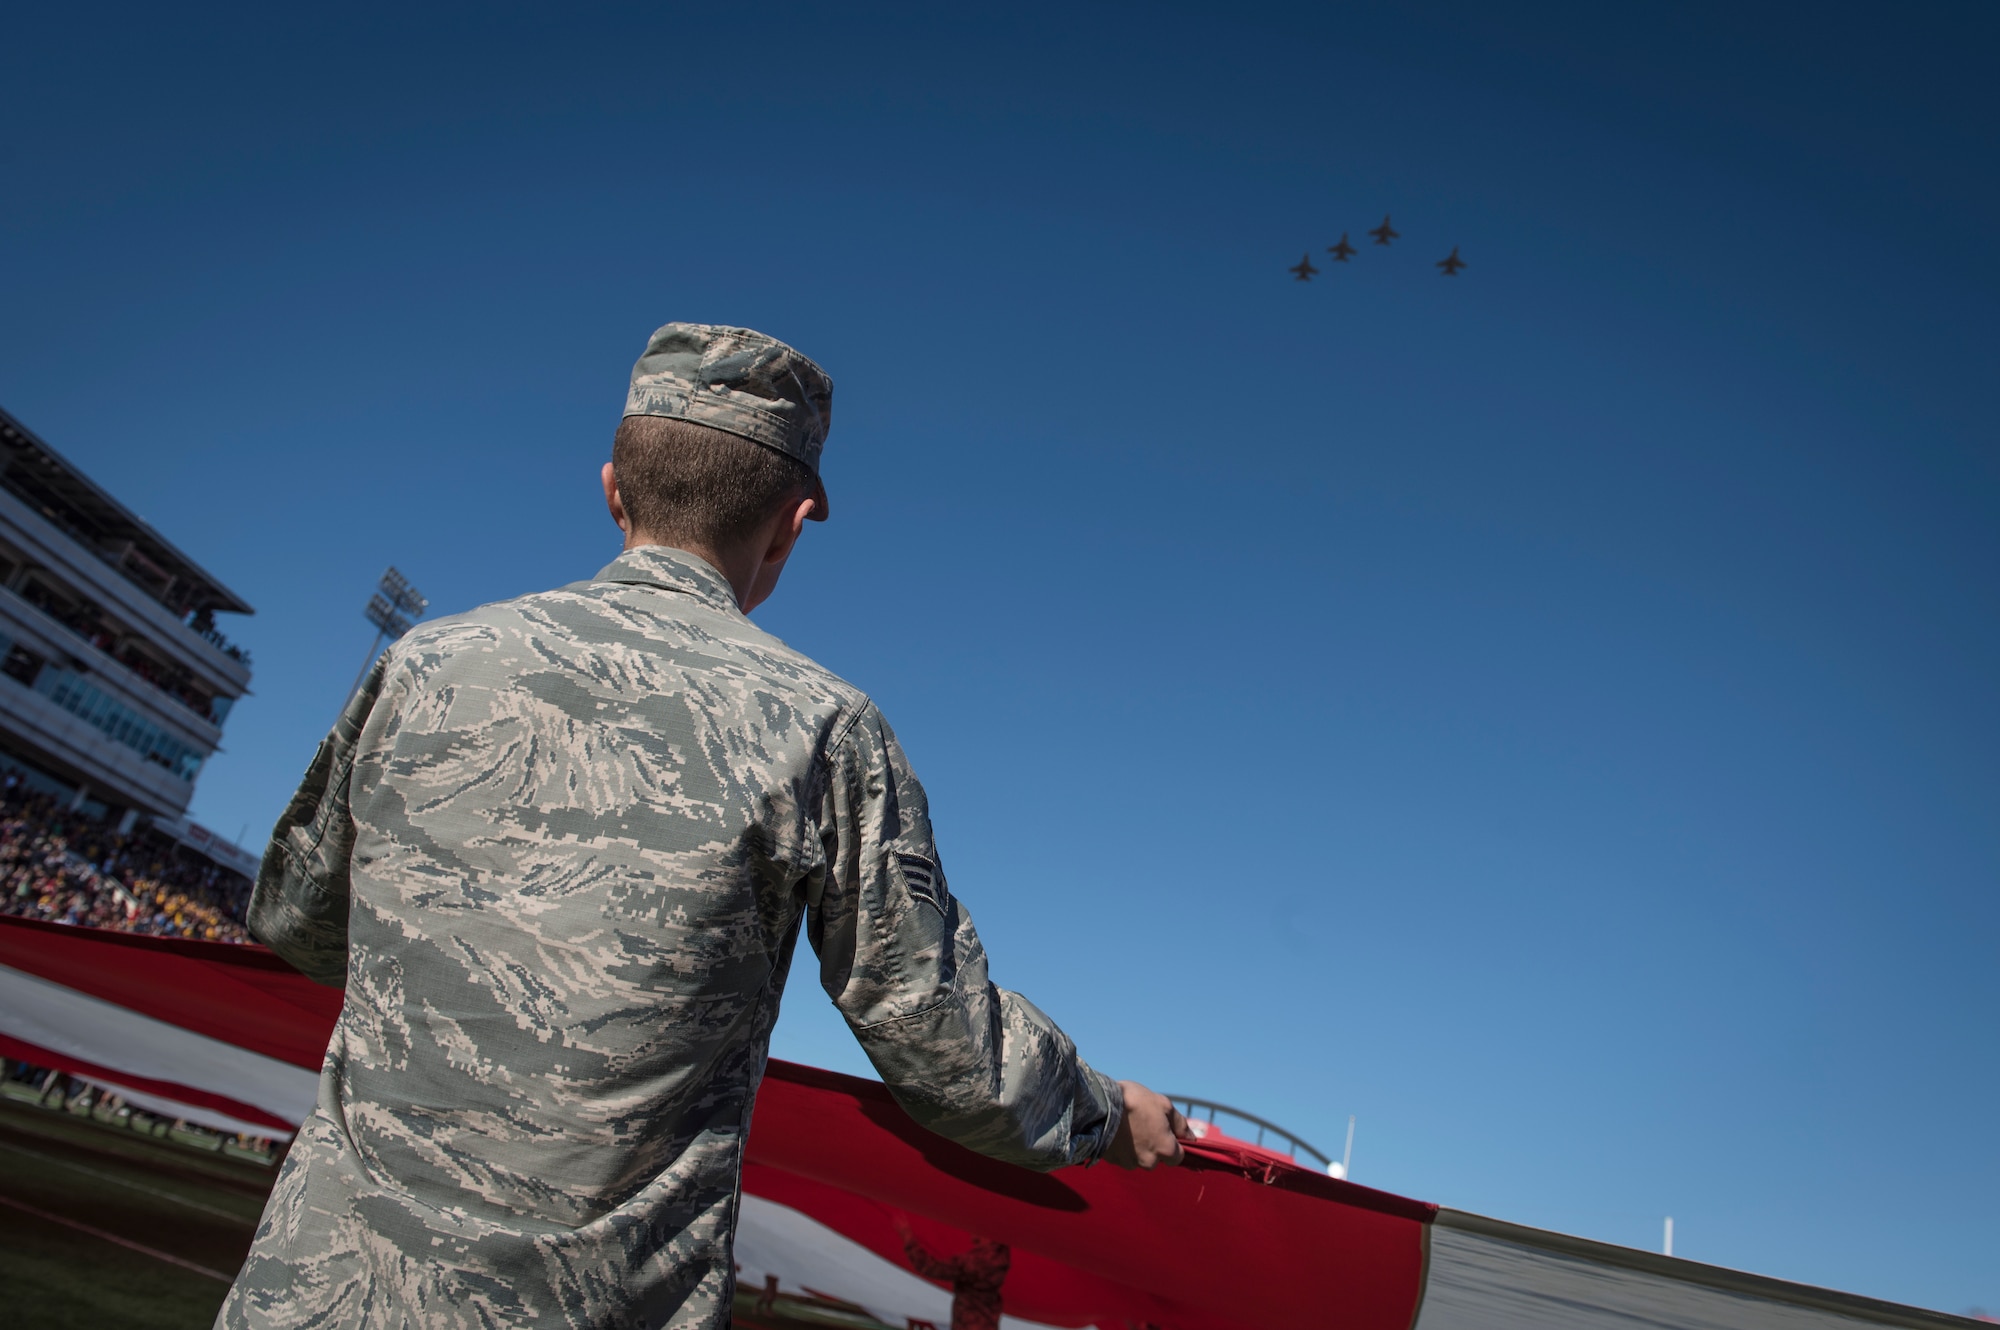 Senior Airman Garrett Tarpley, a fuels distribution specialist assigned to the 99th Logistics Readiness Squadron at Nellis Air Force Base, Nevada, carries part of a half-ton American flag, while four F-16 Fighting Falcon fighter jets assigned to the 24th Tactical Air Support Squadron at Nellis fly overhead during the 2018 Las Vegas Bowl opening ceremony at Sam Boyd Stadium in Las Vegas, Dec. 15, 2018. The 2018 Las Vegas Bowl featured the Arizona State University Sun Devils versus the Fresno State University Bulldogs. The Bulldogs won 31-20. (U.S. Air Force photo by Senior Airman Andrew D. Sarver)